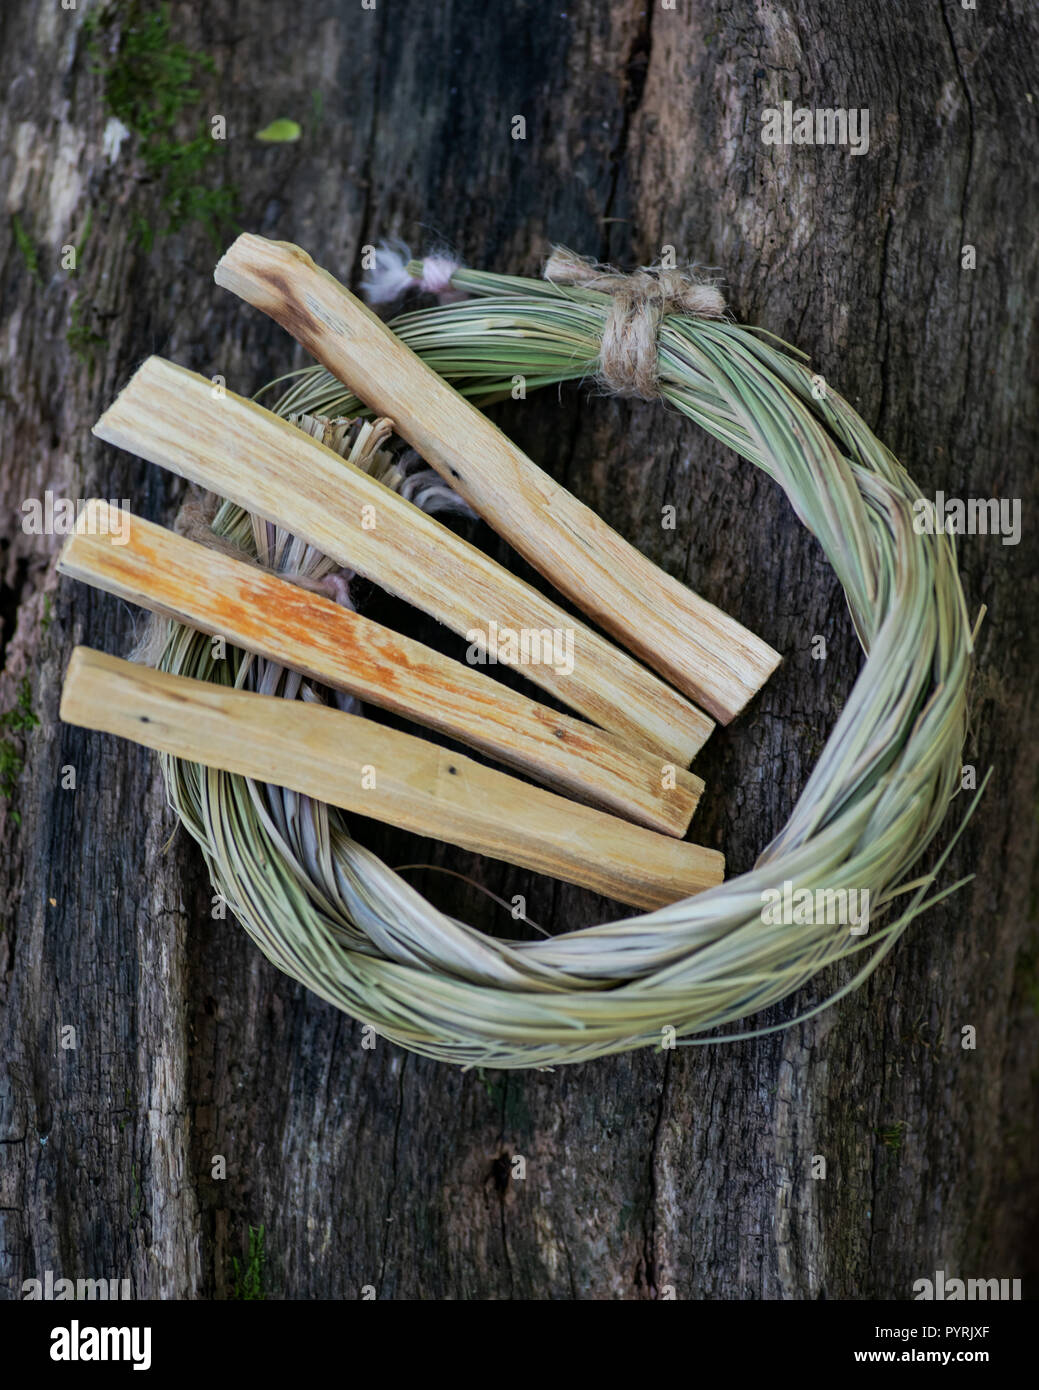 Peruvian Palo Santo holy wood incense sticks and Wildcrafted dried Sweetgrass (Hierochloe odorata) wrapped in organic cotton string on a tree bark Stock Photo